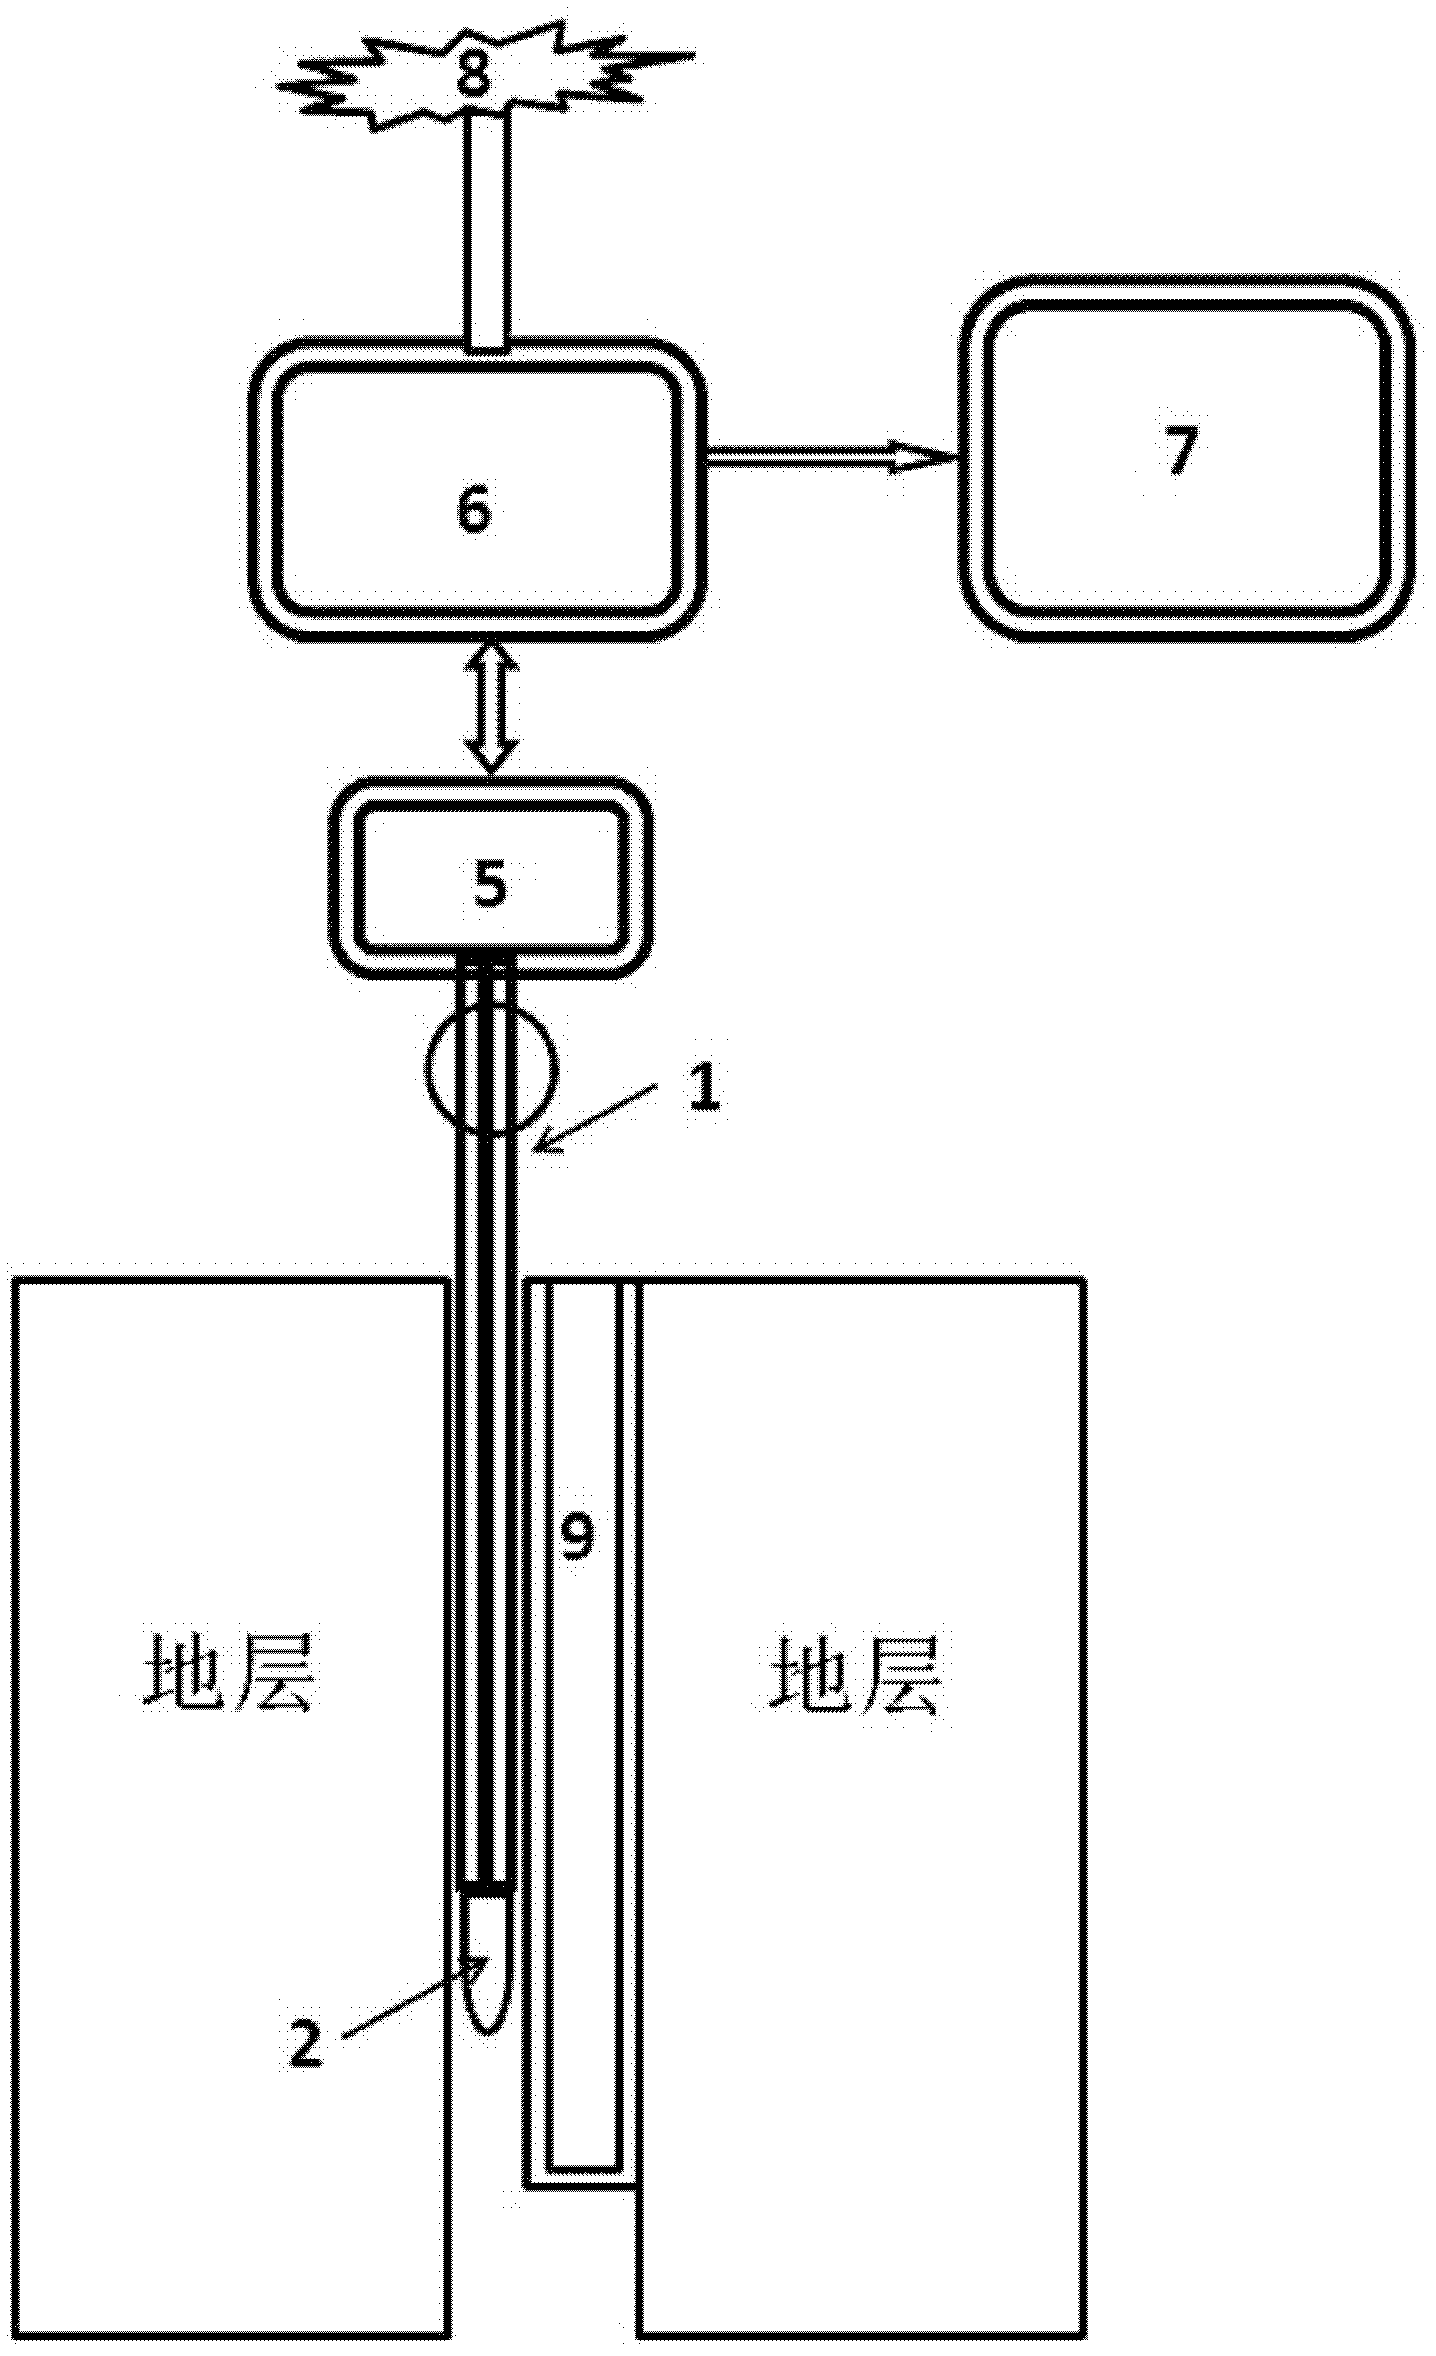 System for continuously monitoring temperature and pressure during steam injection and soaking process